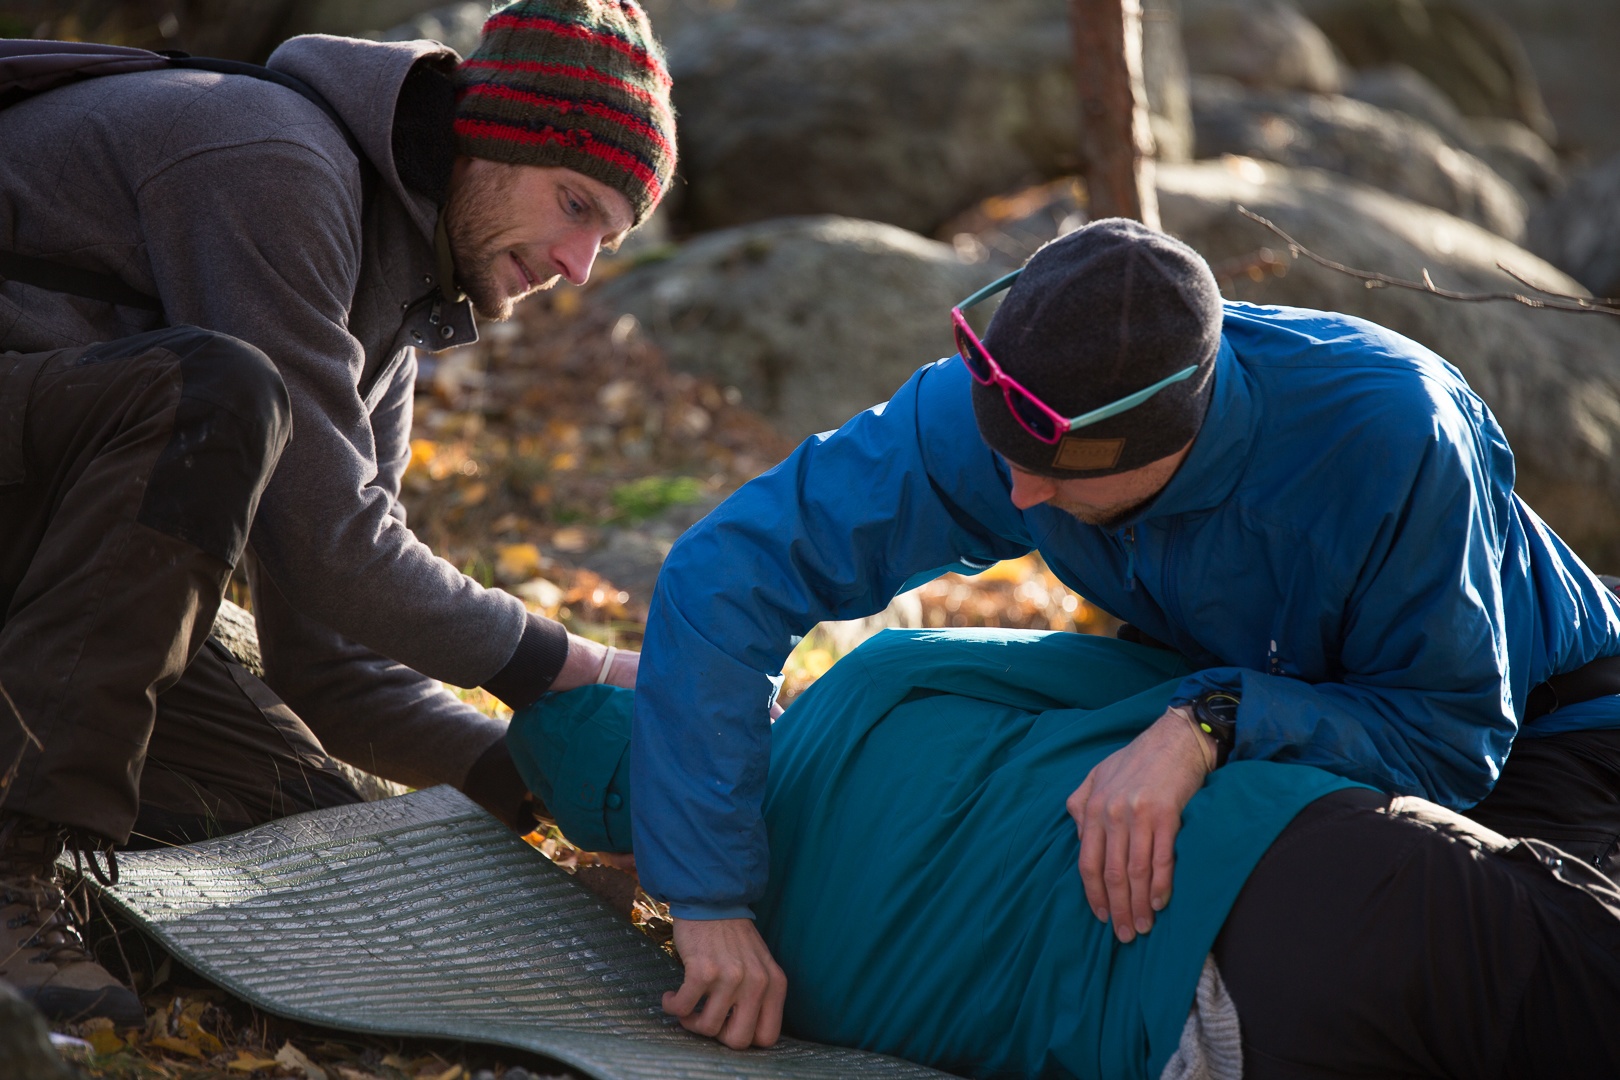 Two wilderness medicine students roll a patient onto a foam pad